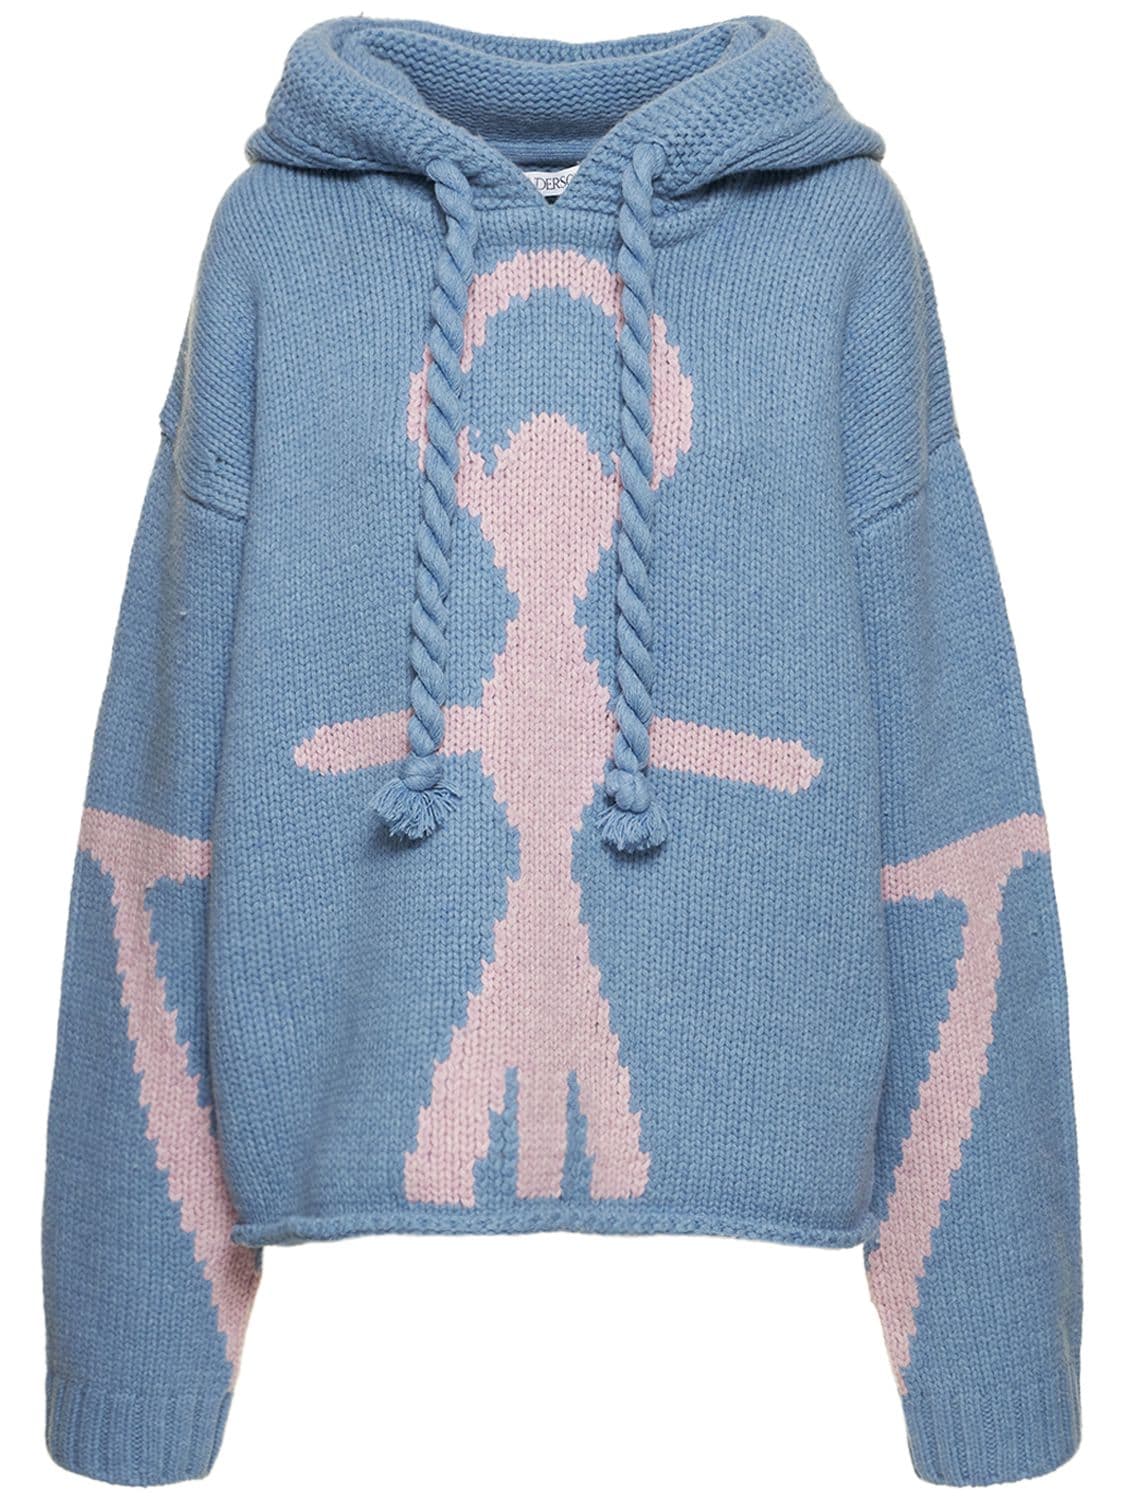 JW ANDERSON ANCHOR JACQUARD KNIT CHUNKY HOODIE